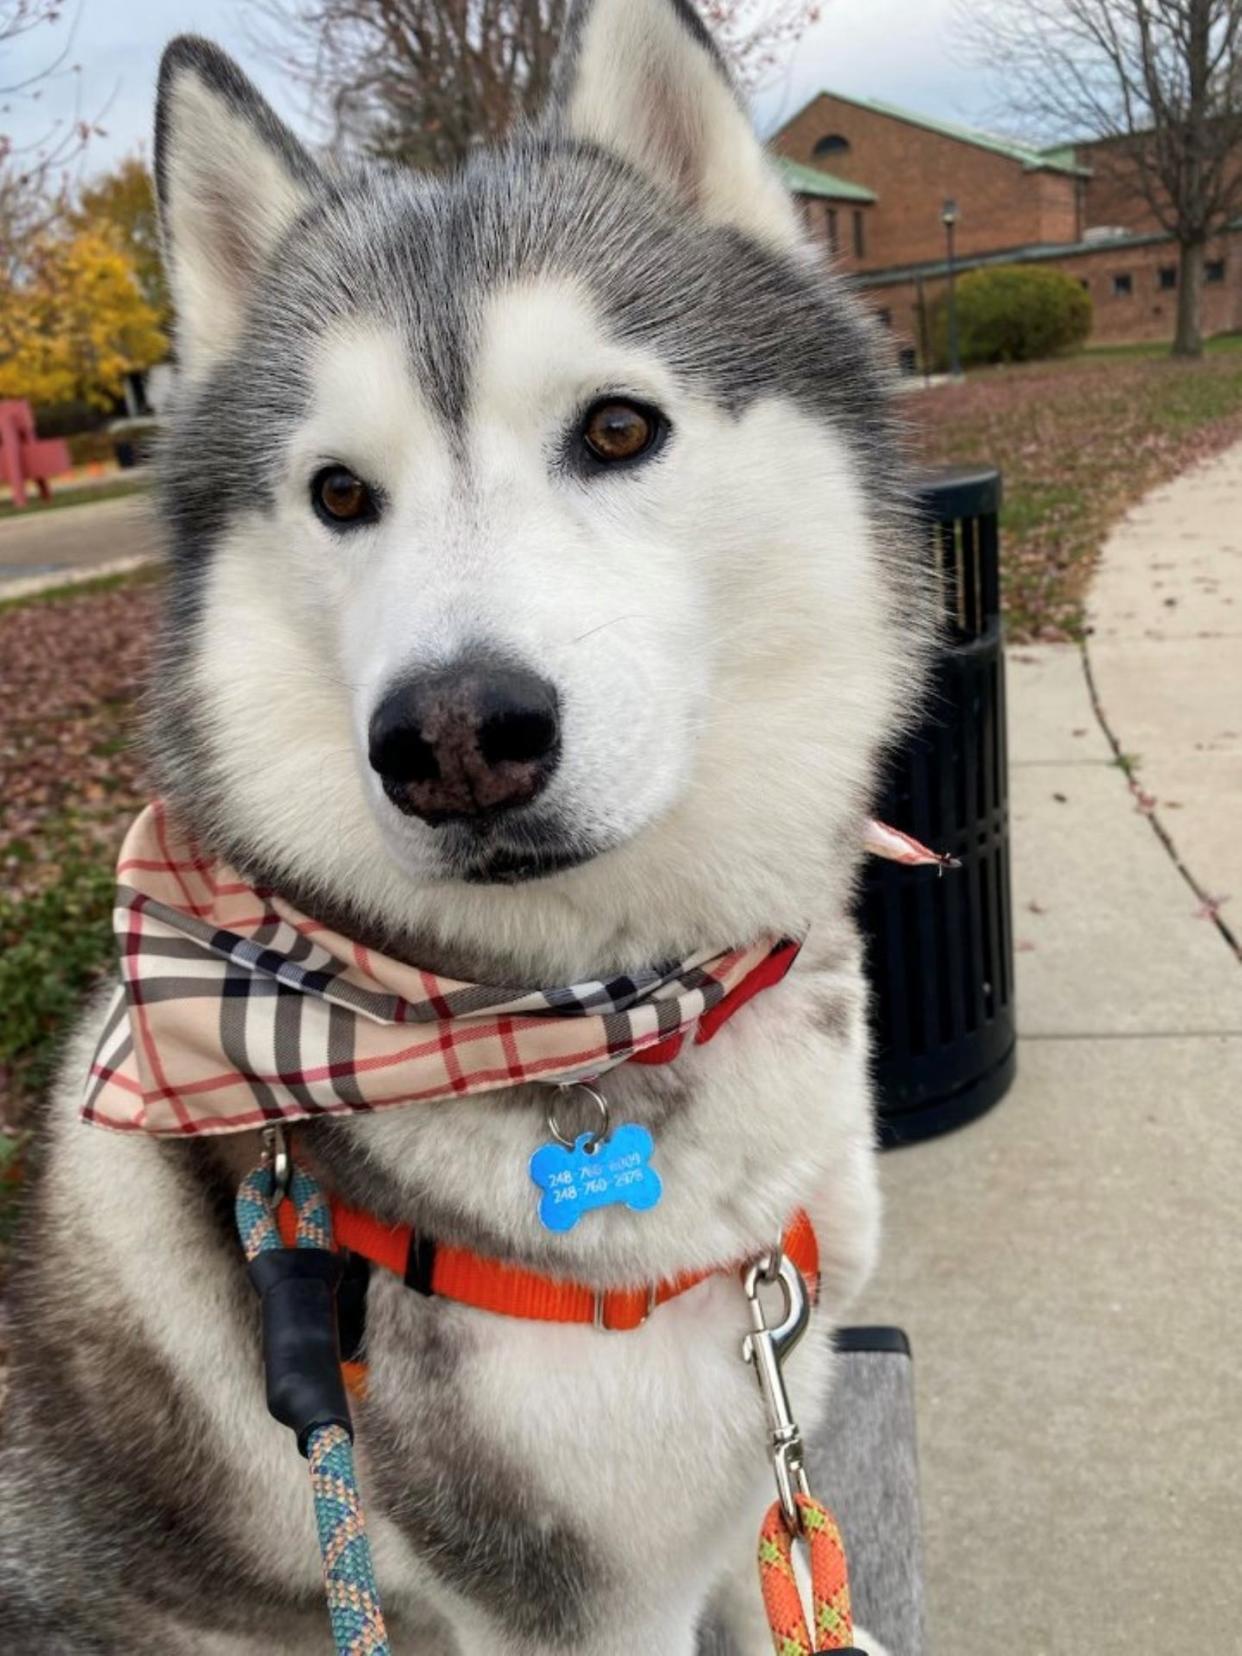 Kai Rosin, an 8-year-old Siberian husky, is owned by Leslie Rosin, who says Kai is “my best friend and is the best support anyone could ask for.”